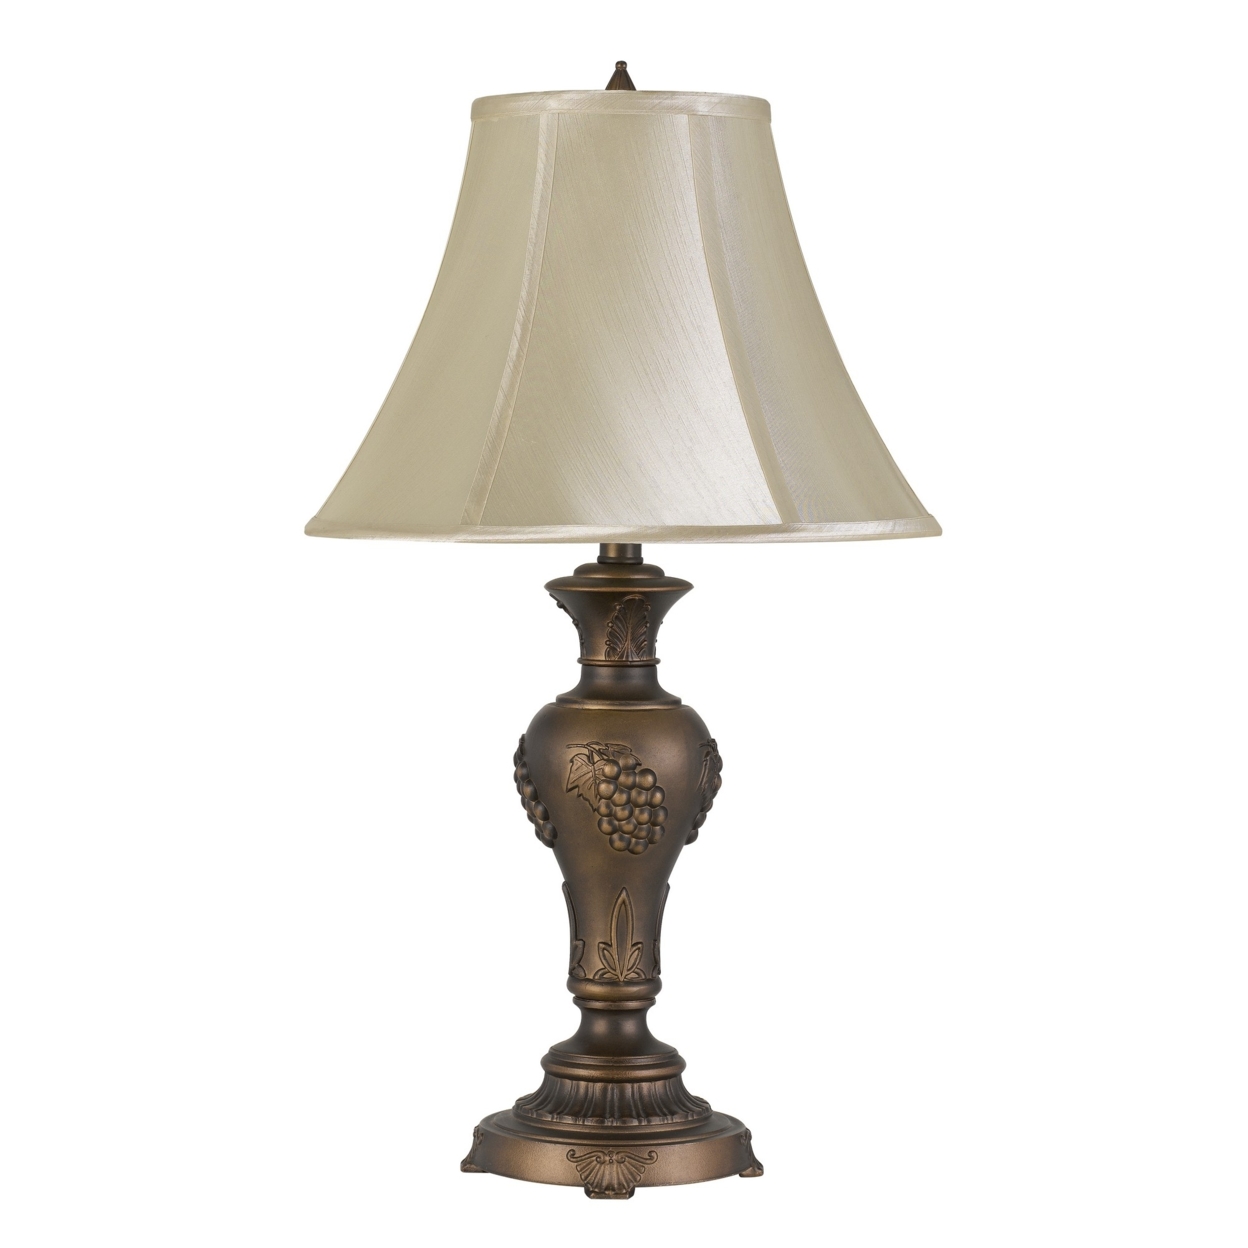 Metal Vase Design Base Table Lamp With Carved Accents, Antique Brass- Saltoro Sherpi